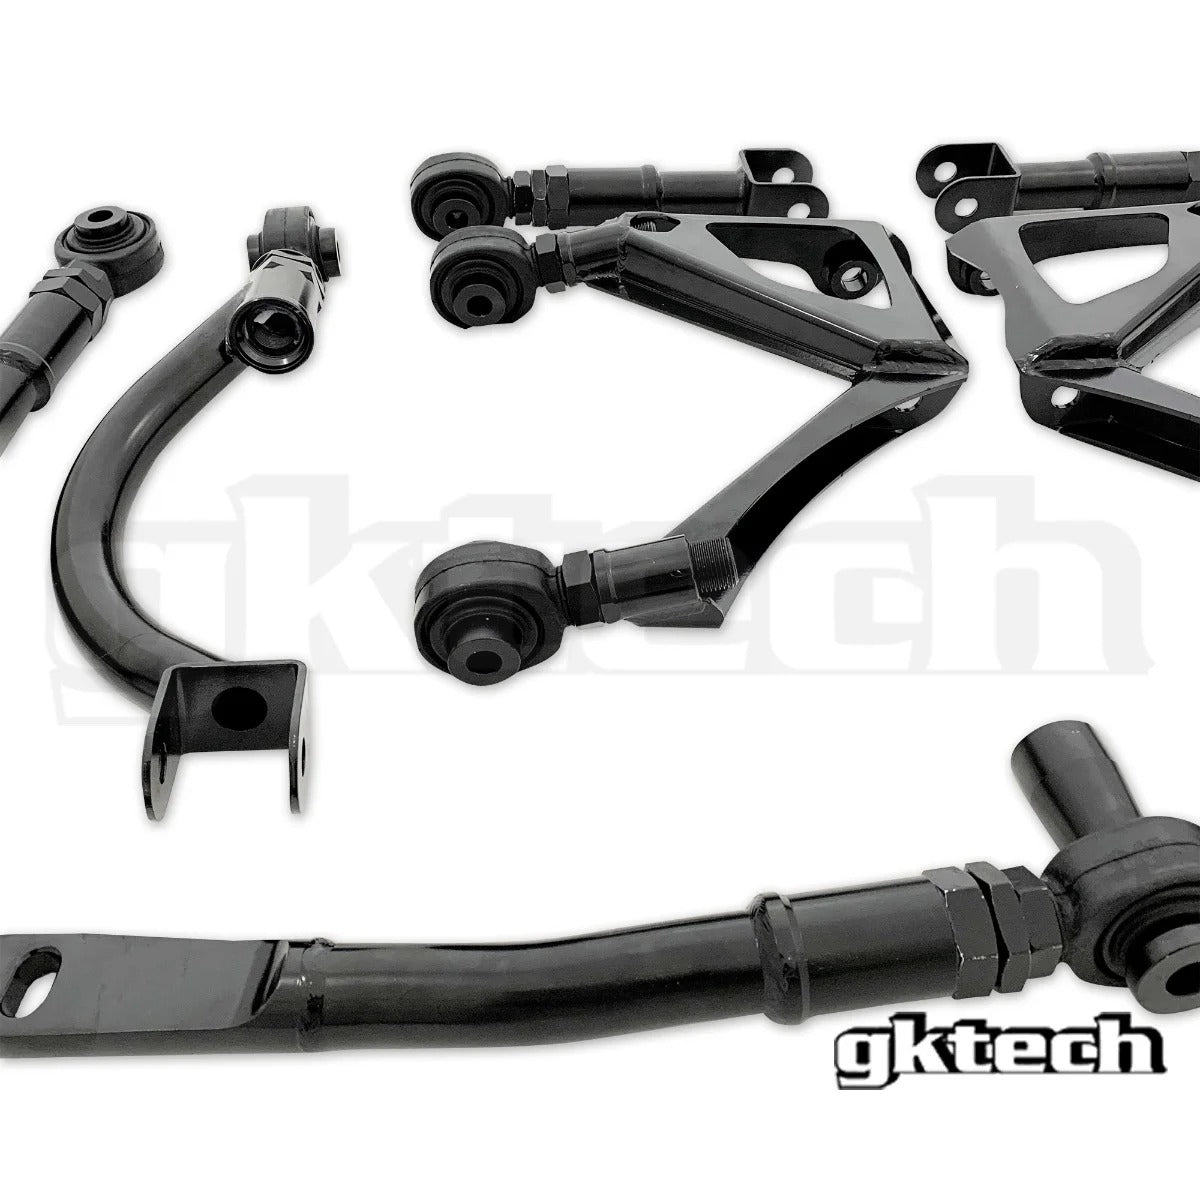 V4 - R33/R34 Skyline Suspension arm package (10% combo discount)